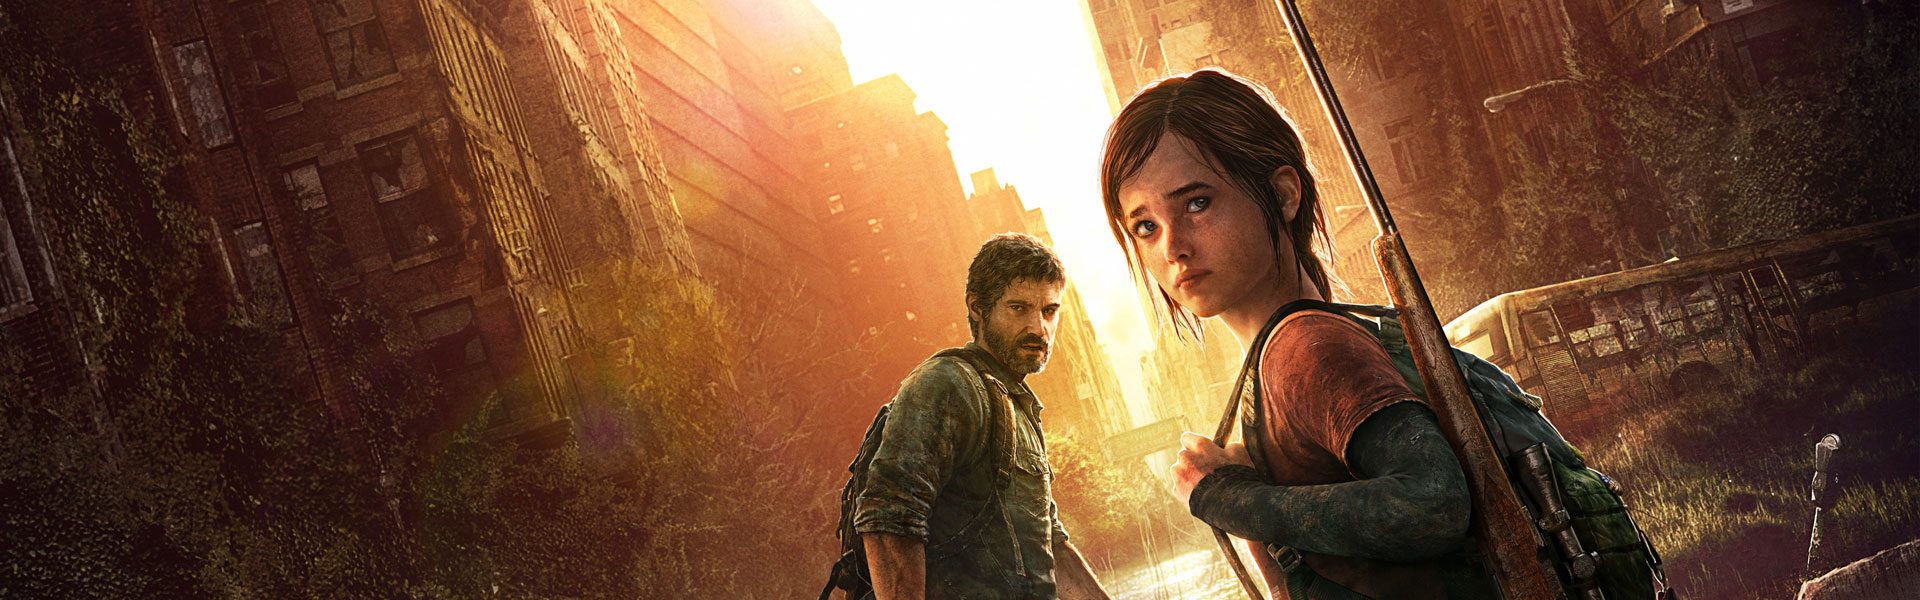 the last of us 1 playstation store